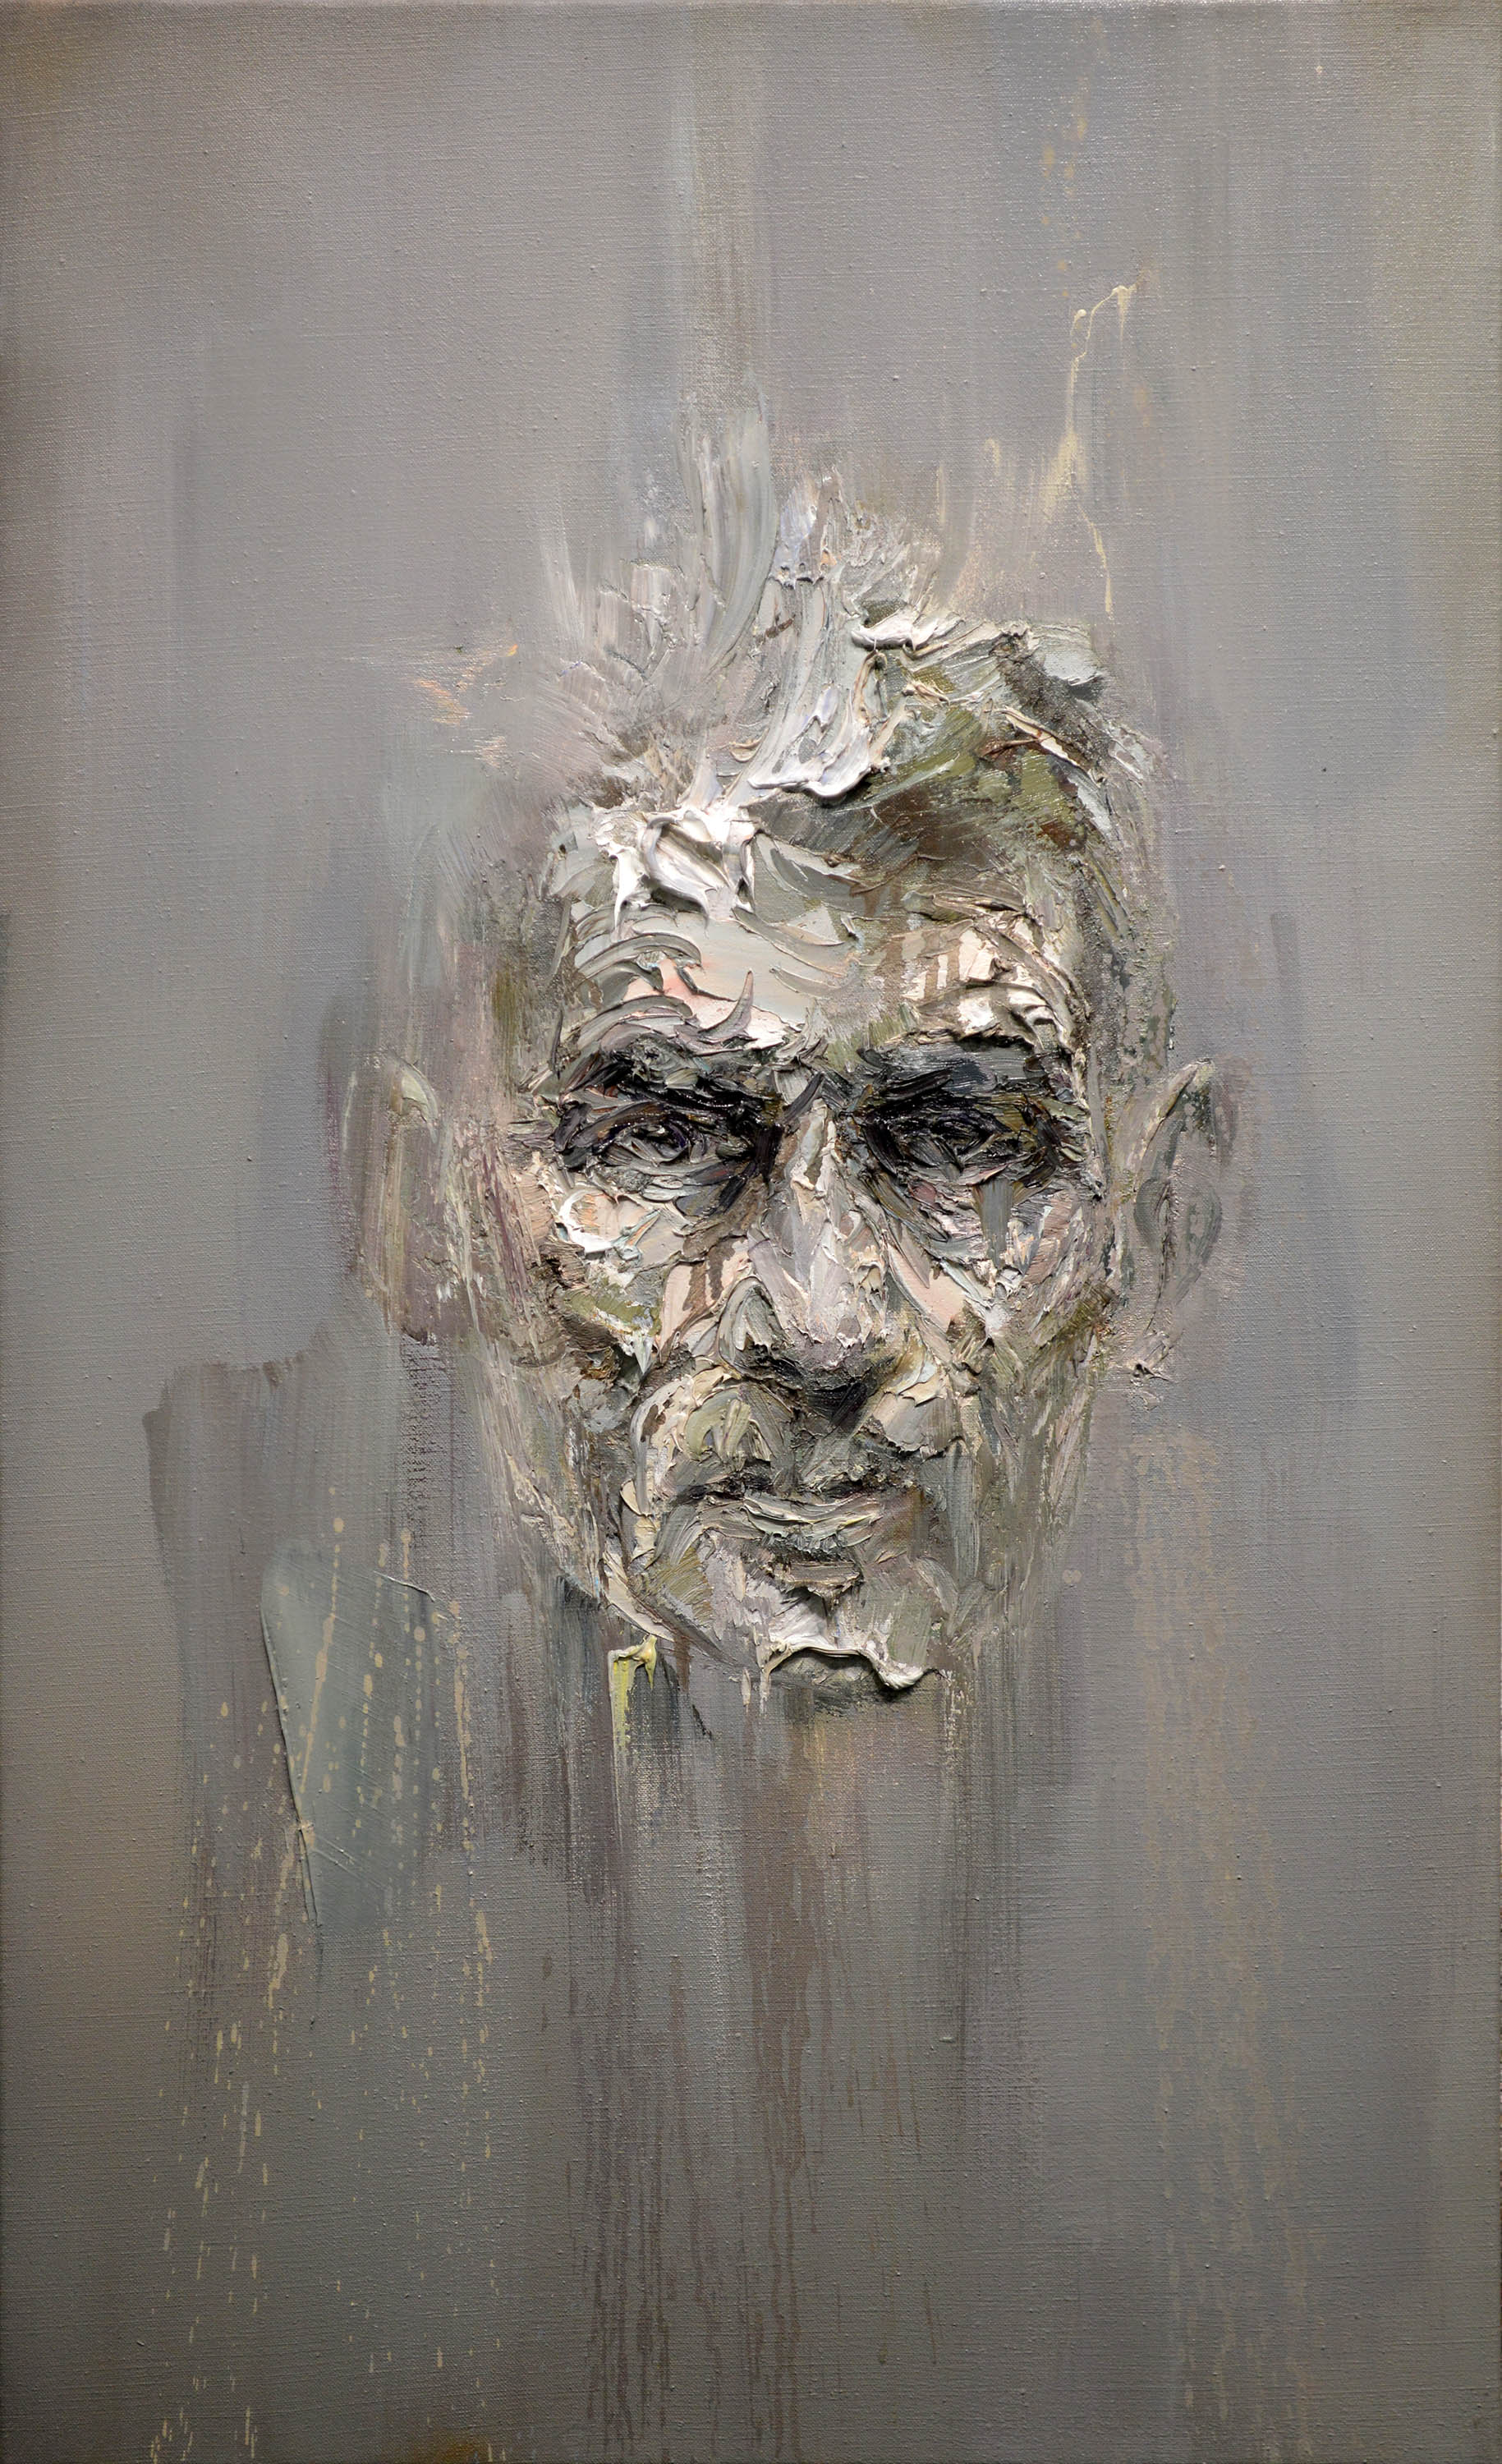 A portrait by painter Mathieu Laca depicting the existential angst of the Irish author Samuel Beckett